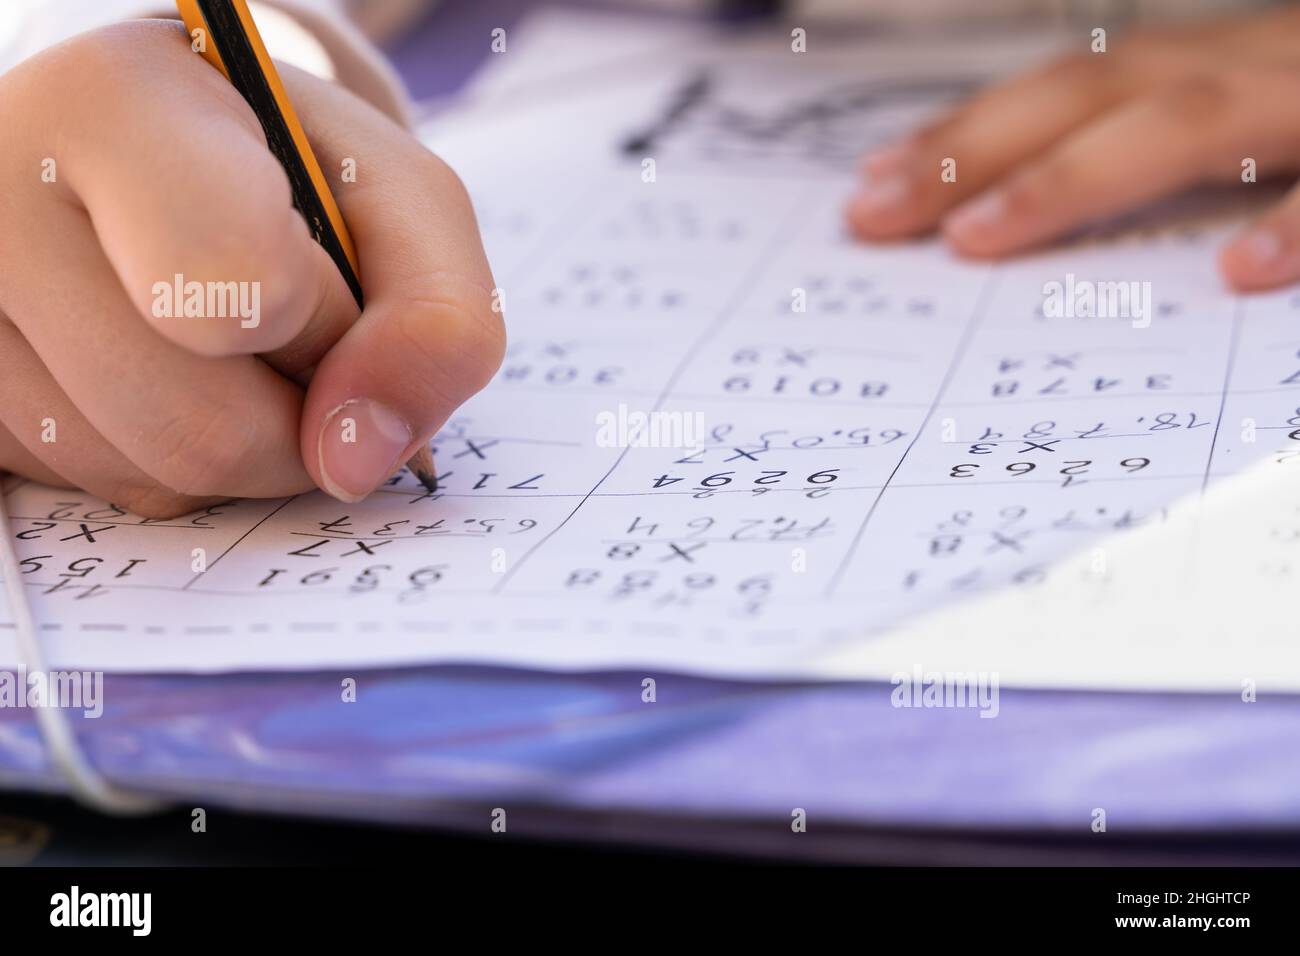 Close up on hands of little girl writing with pencil doing maths multiplication exercise sheet. School homework concept Stock Photo